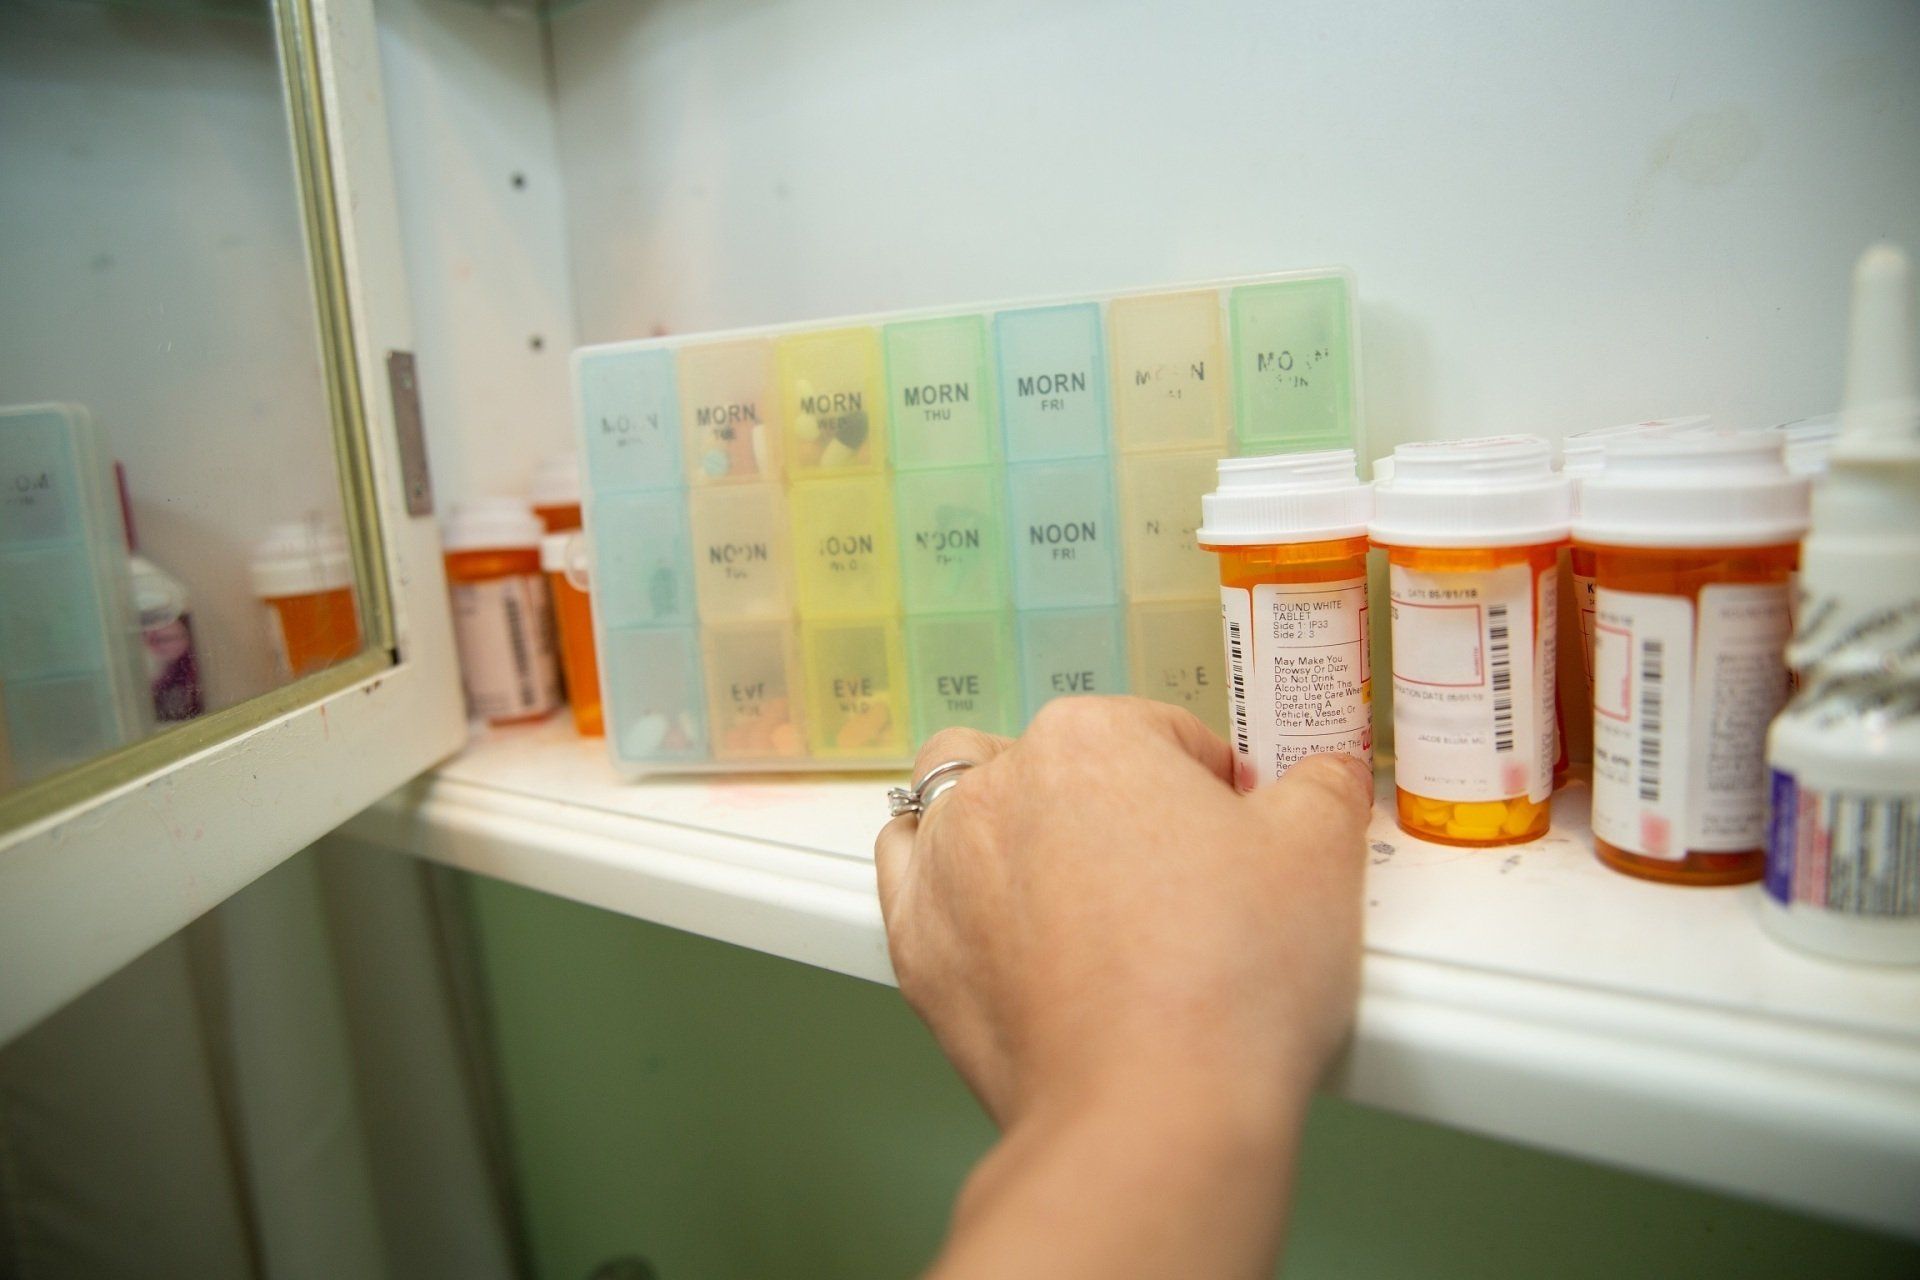 medications can be taken to help in addiction recovery